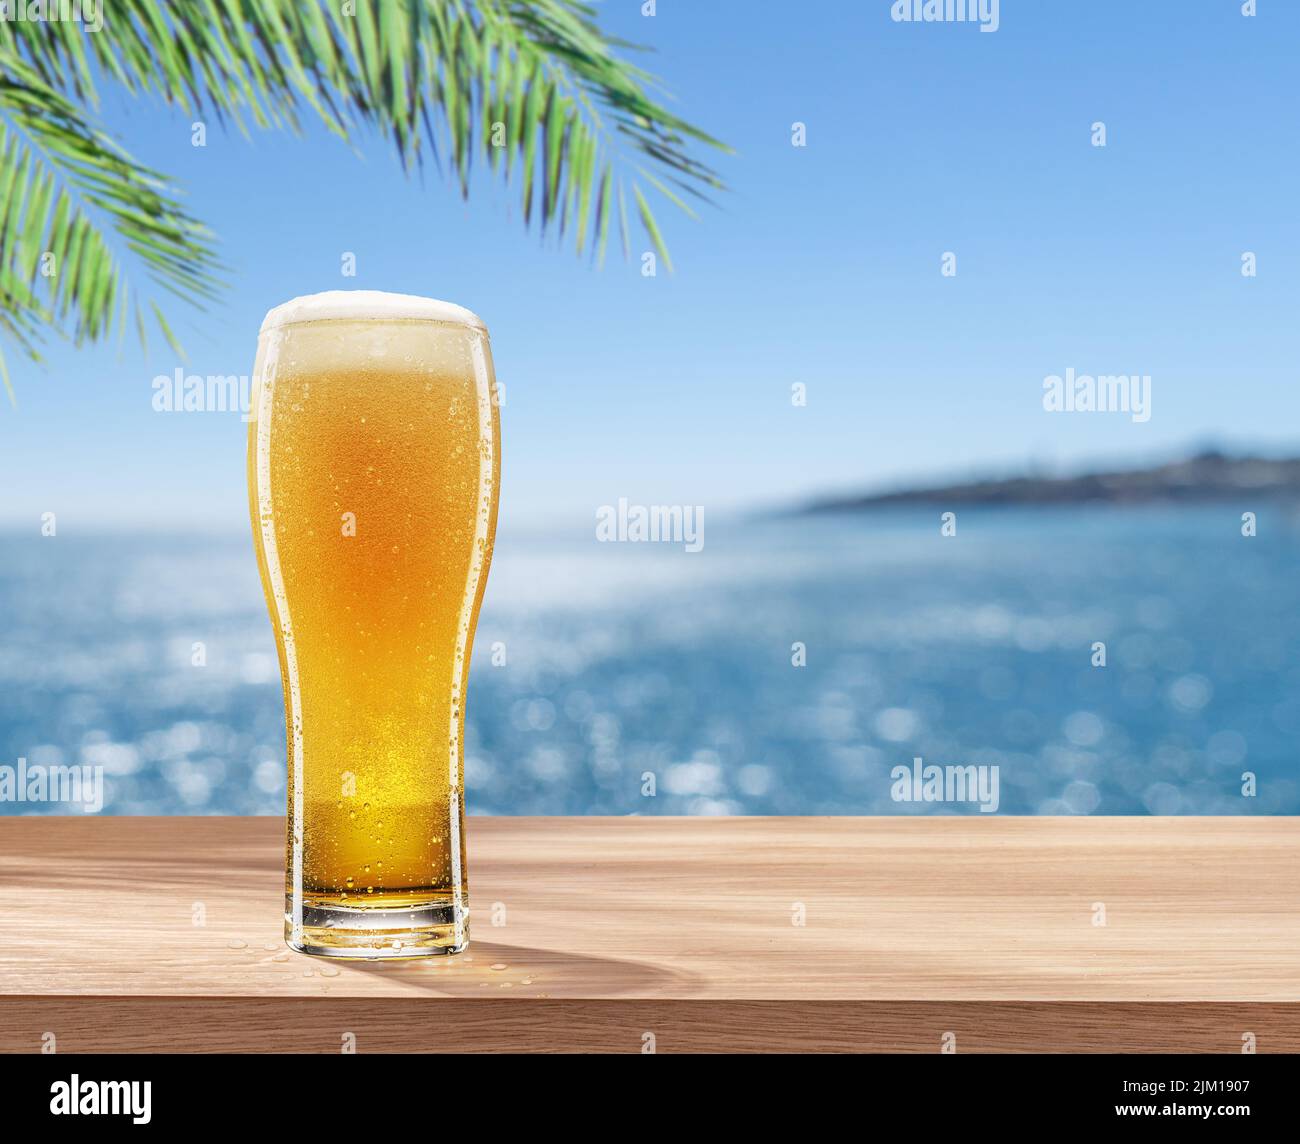 Glass of chilled beer on table and blurred sparkling sea at the background. Place for your product or brand name display. Stock Photo